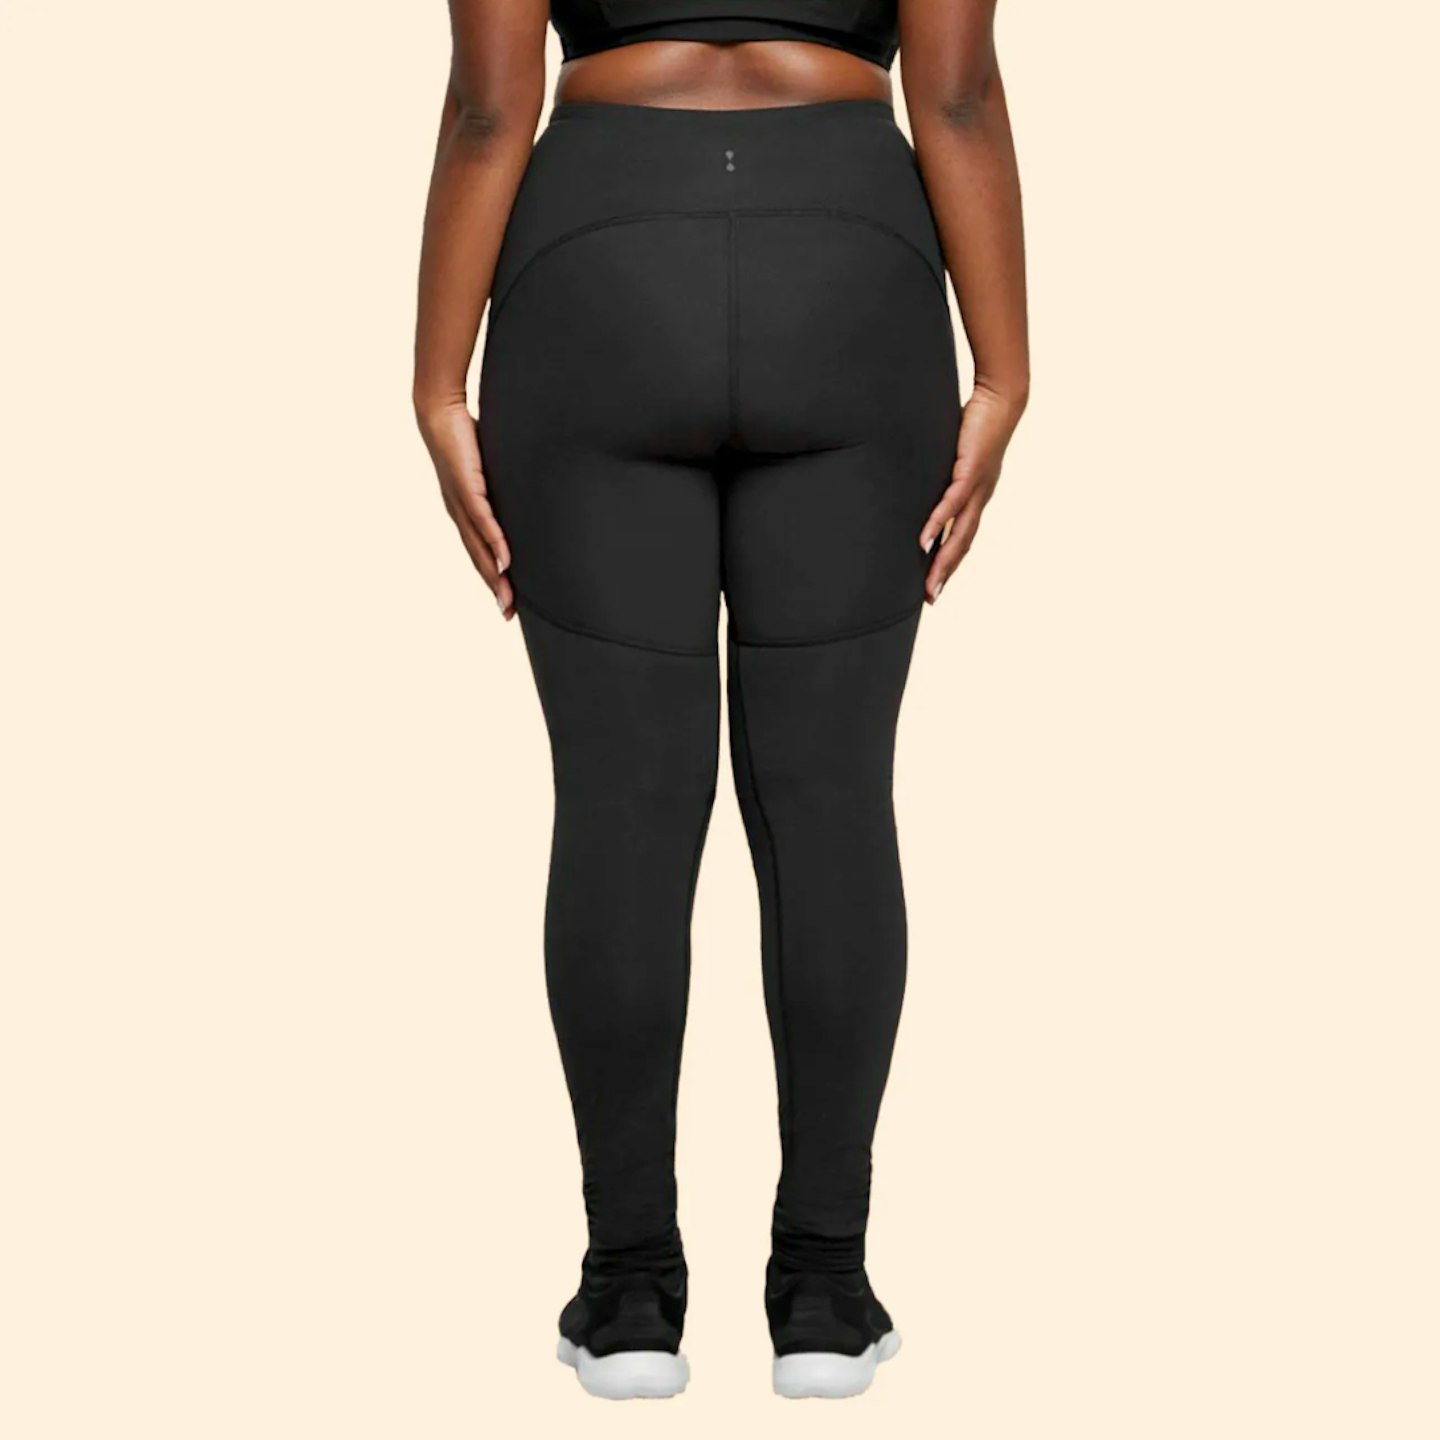 Period pants and proof leggings exist - here's what you need to know